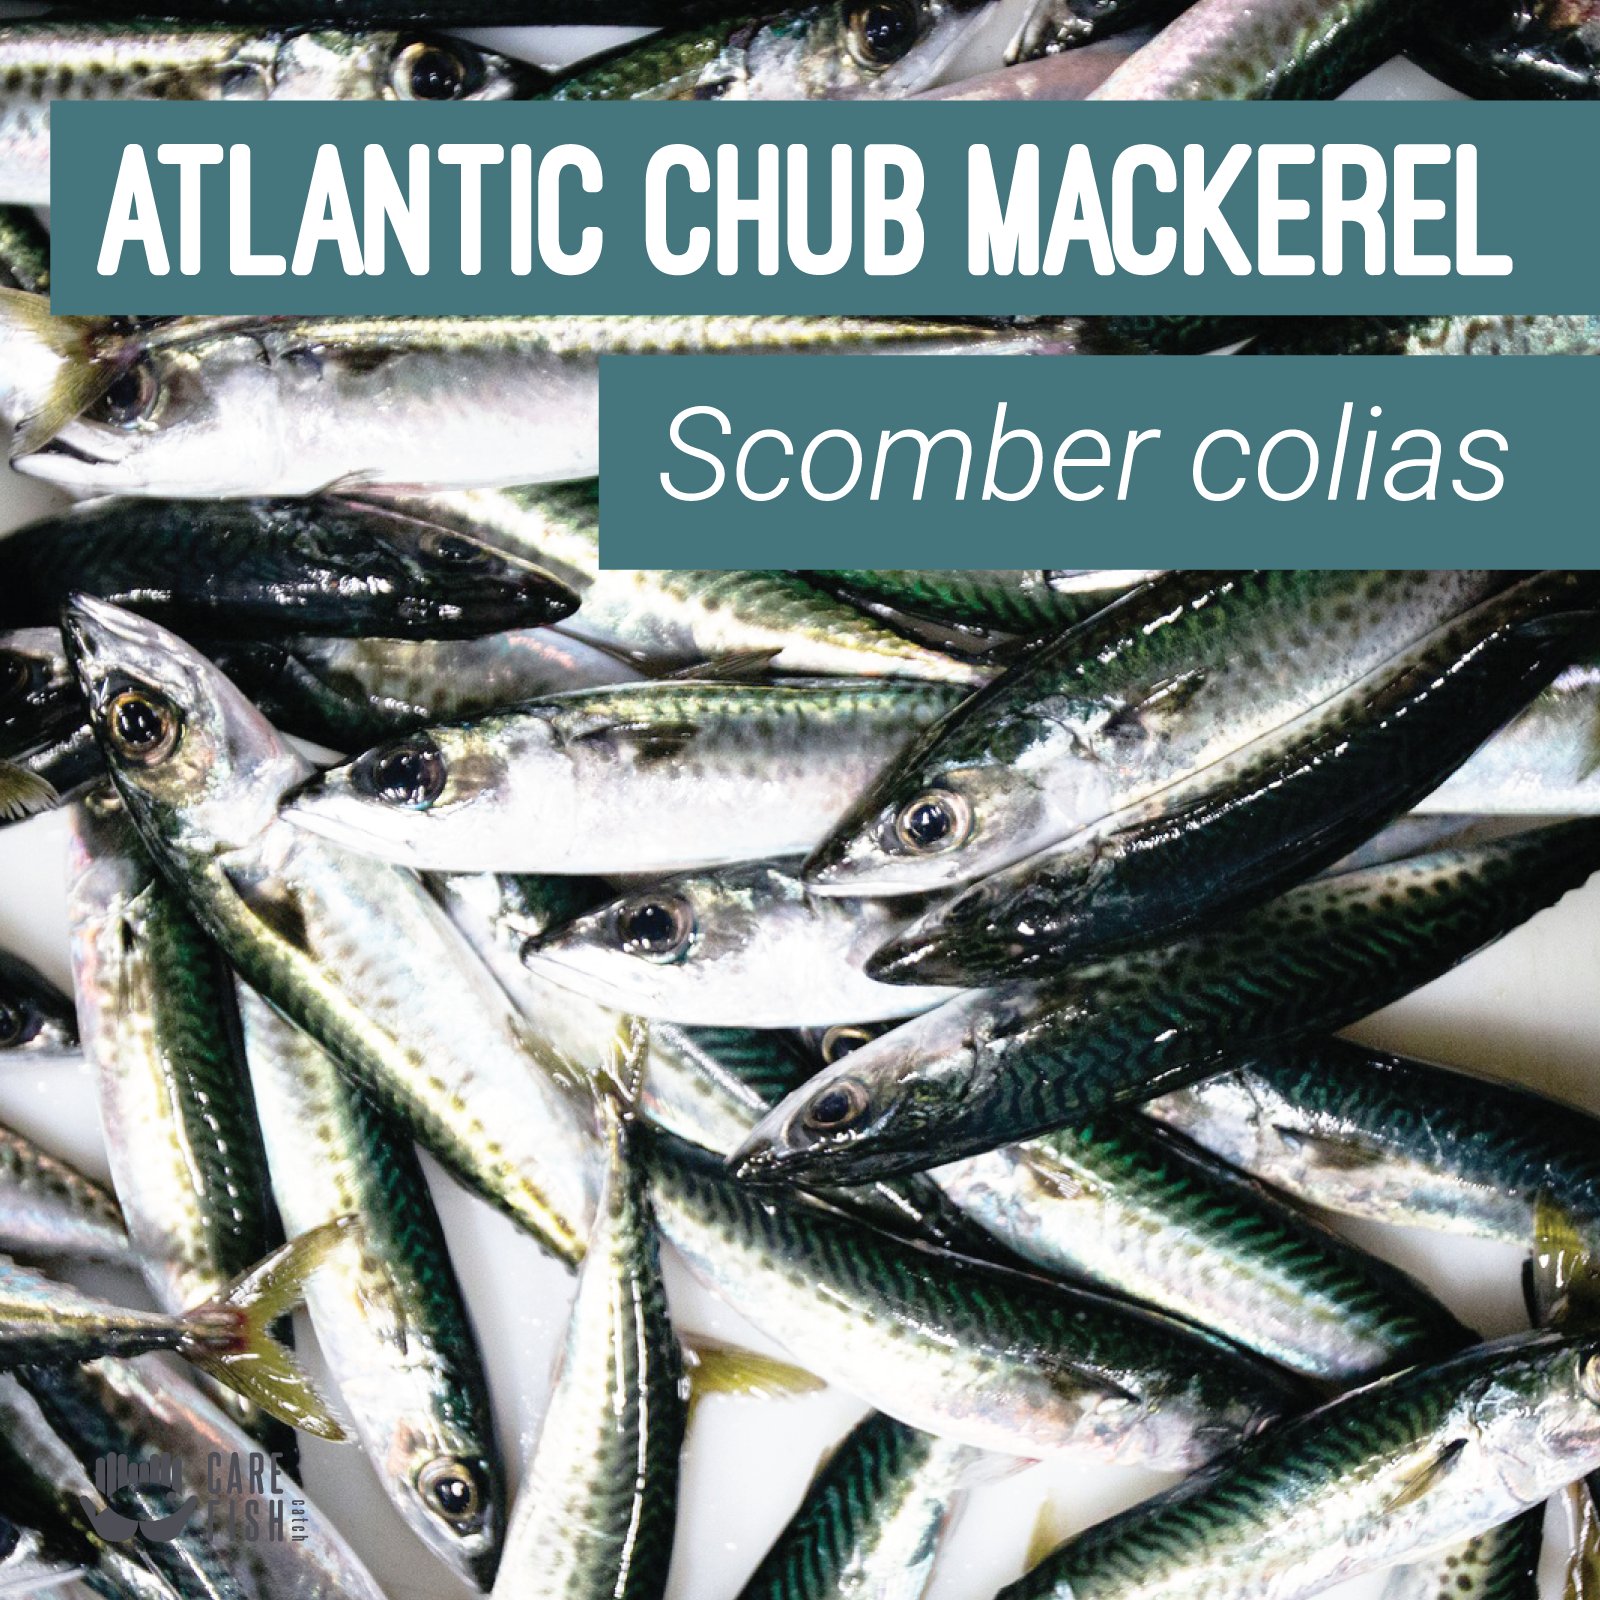 CAREFISH_Catch on X: 🐟Atlantic chub mackerel (Scomber colias) is one  important #fishedspecies. It suffers from #injuries and #stress by  #purseseine hauling. Storing onboard may happen alive, also causing  #suffering😔. More? Visit its #